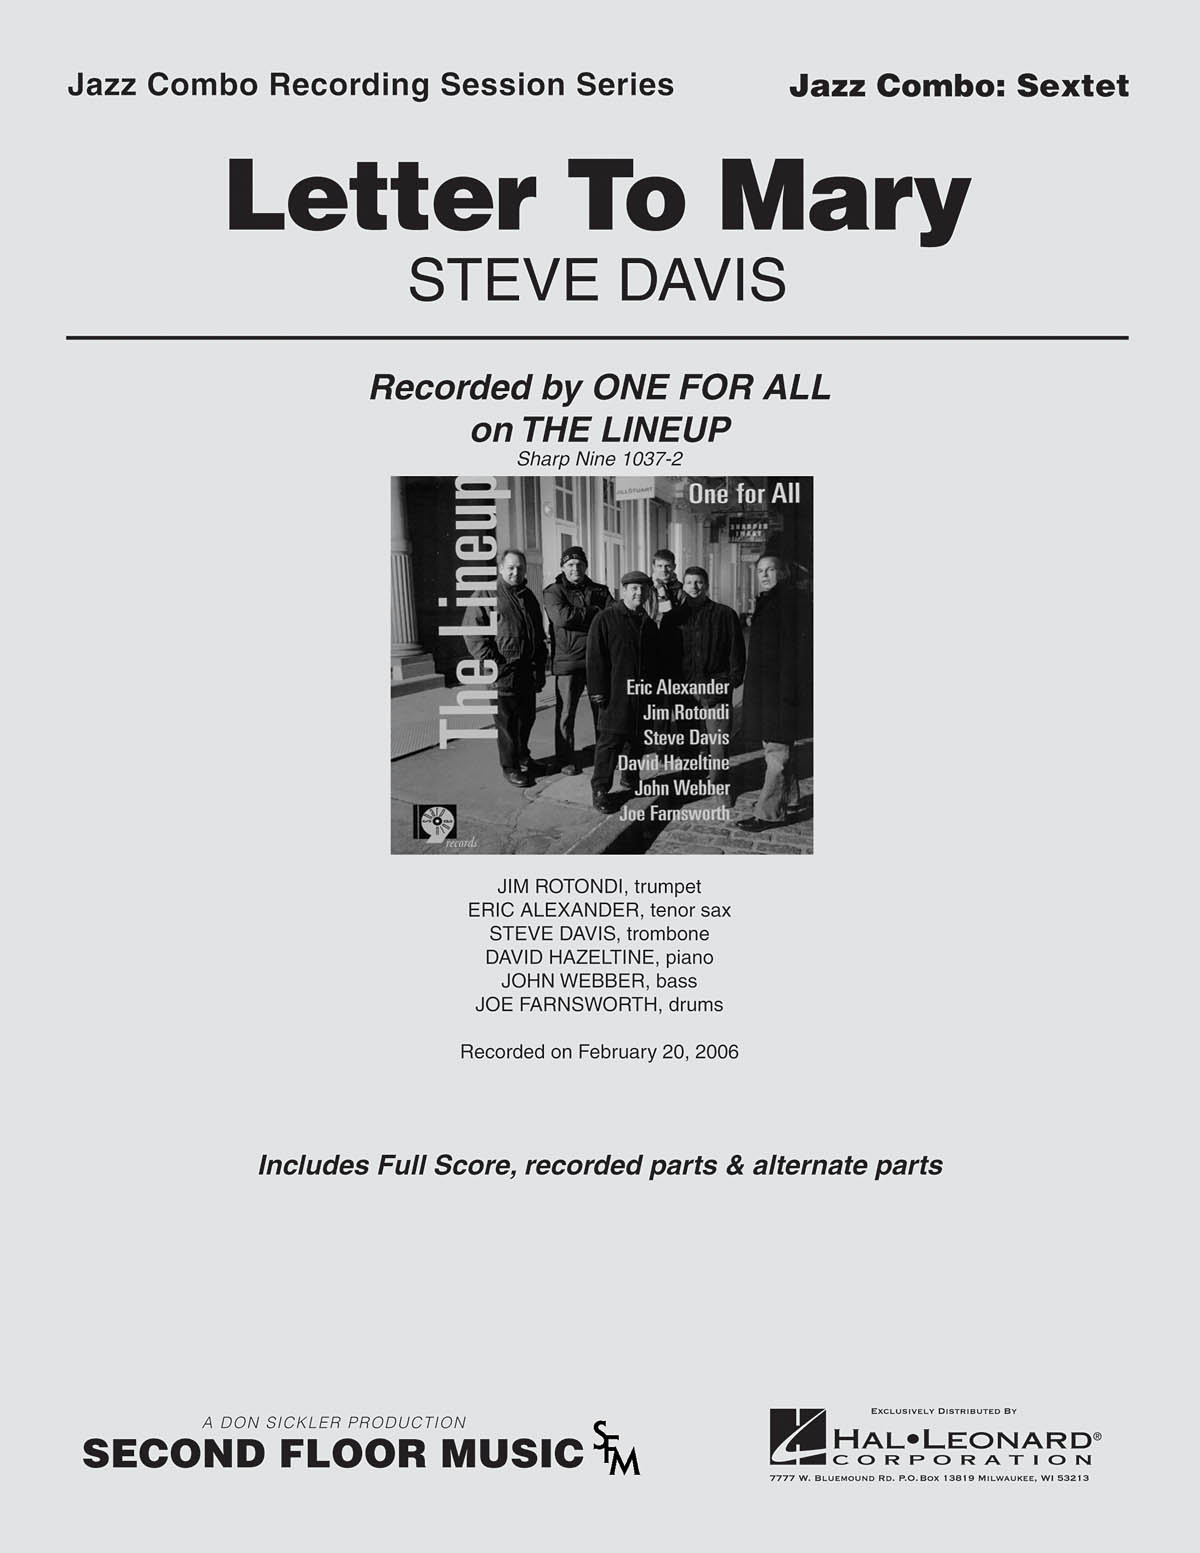 Letter to Mary